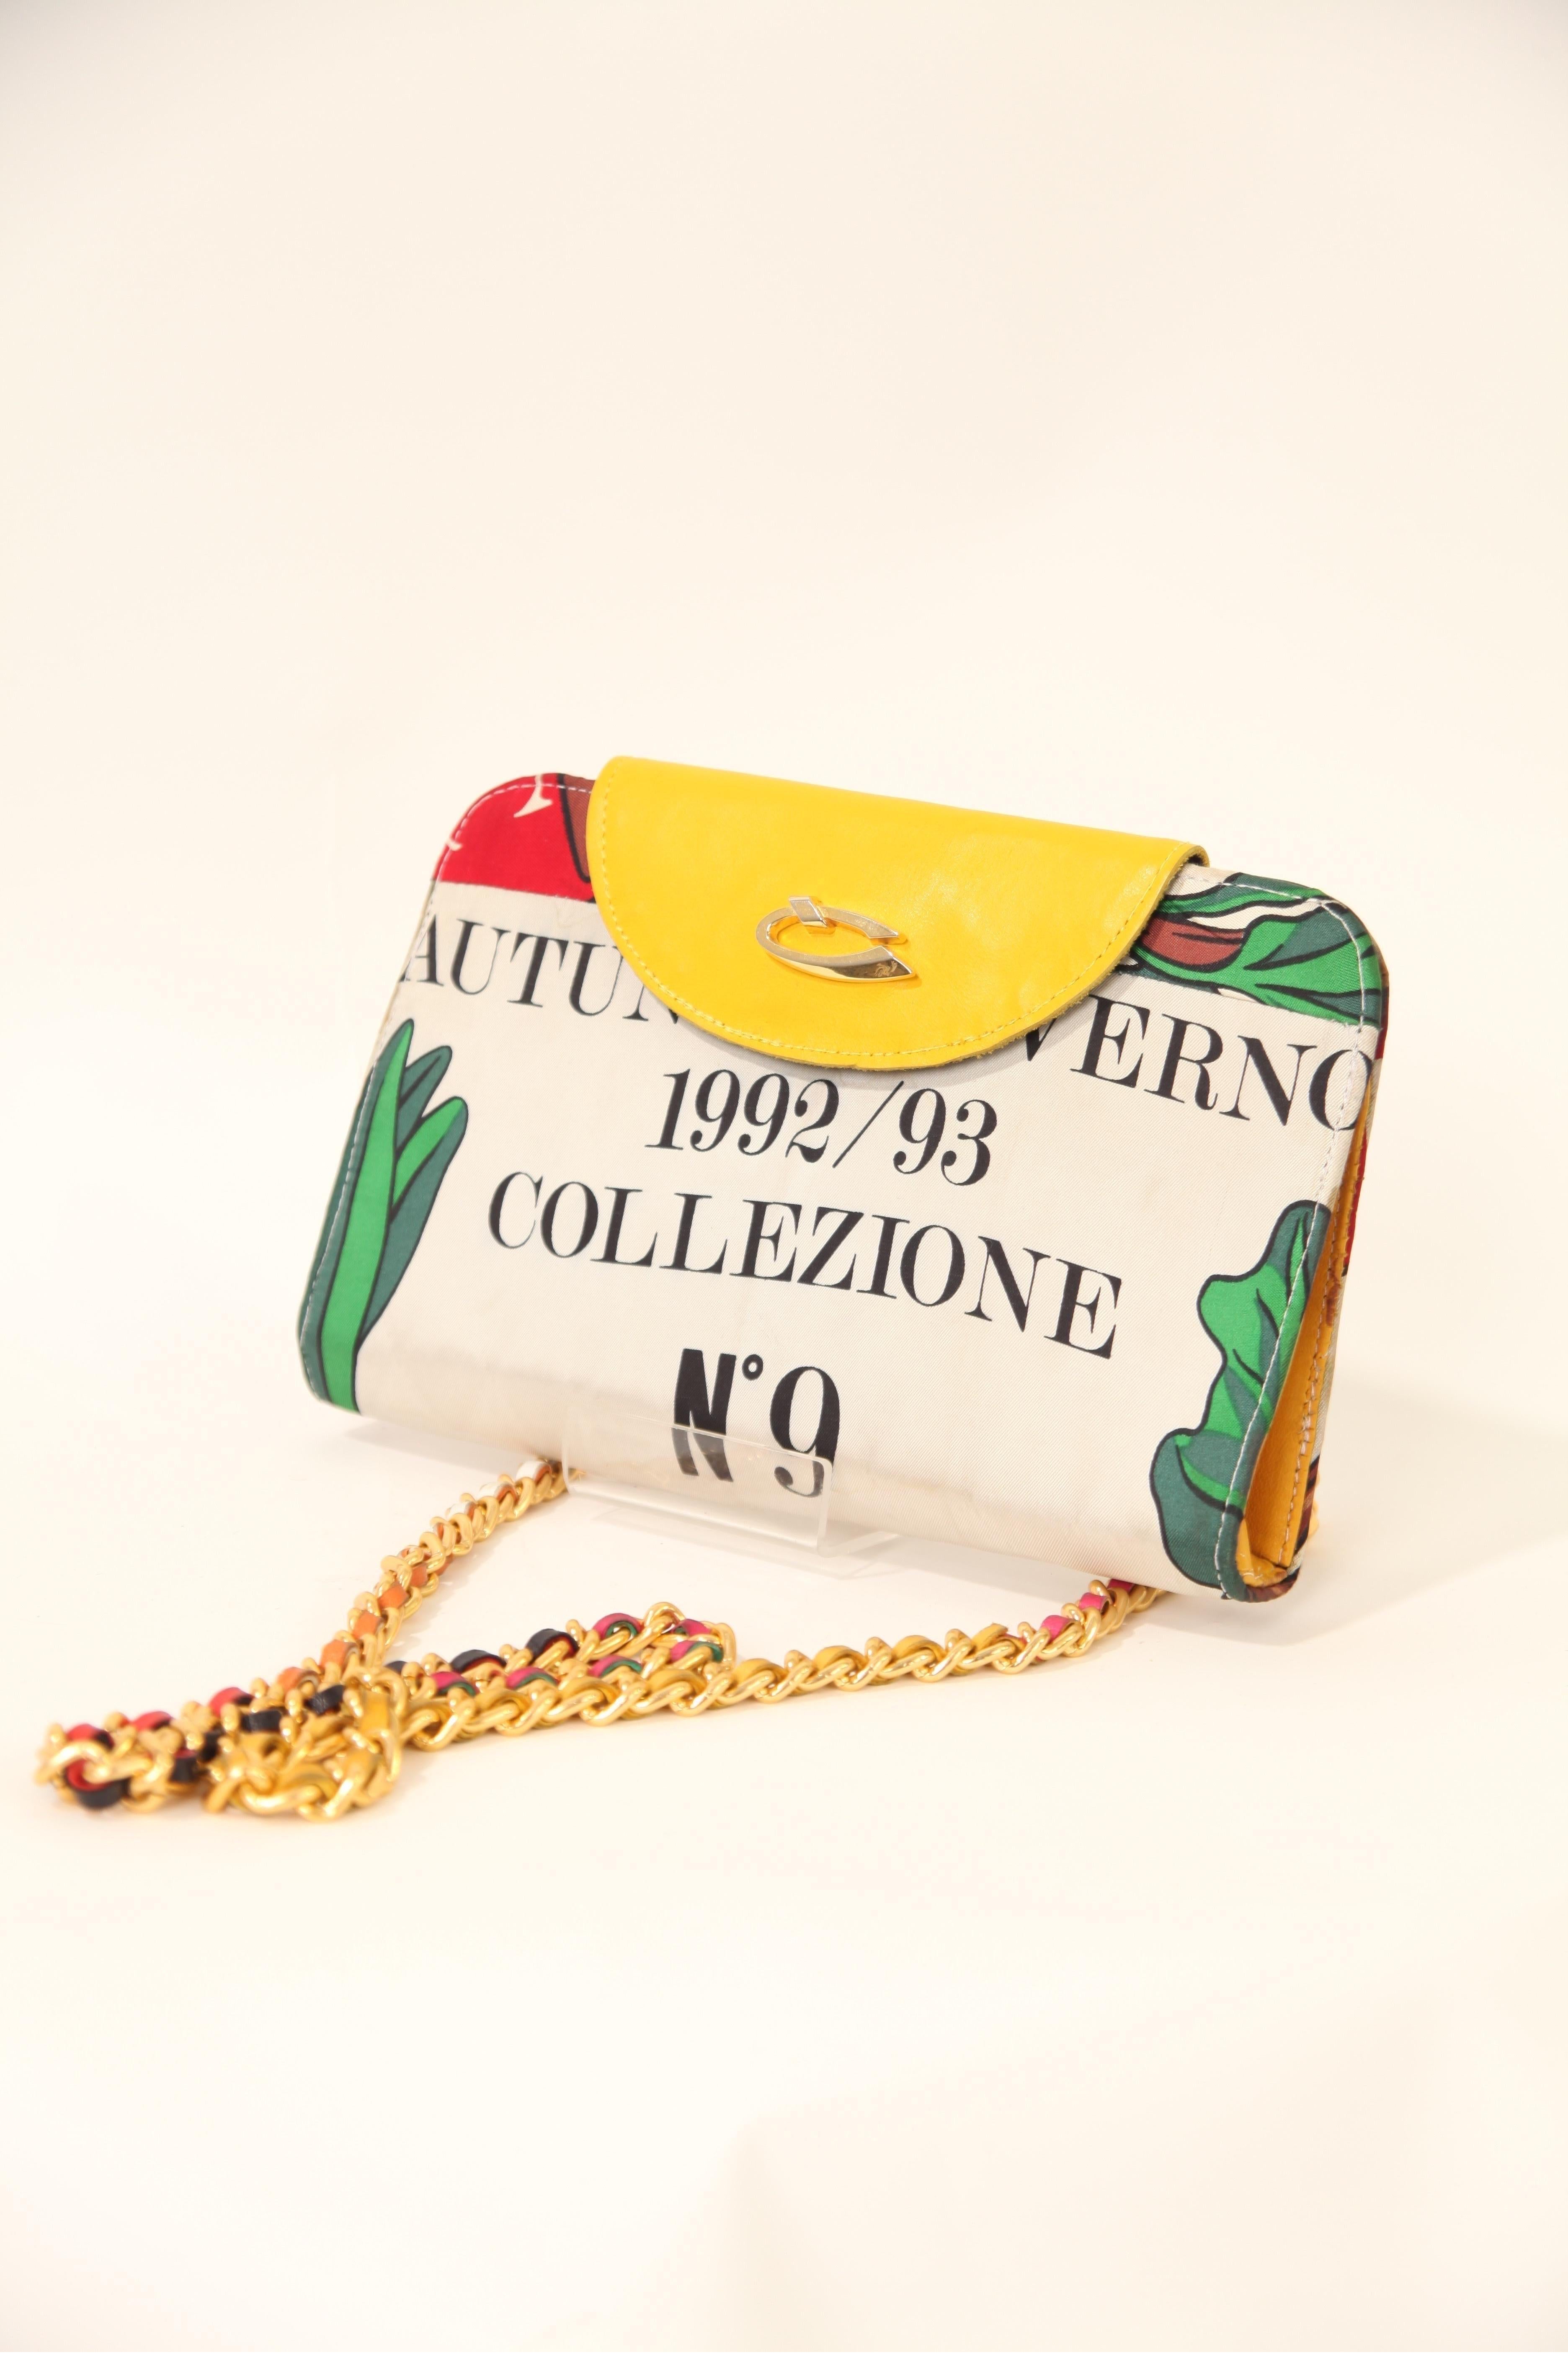 Moschino Cheap and Chic multicolour leather and textiles  clutch bag. C1992 For Sale 4